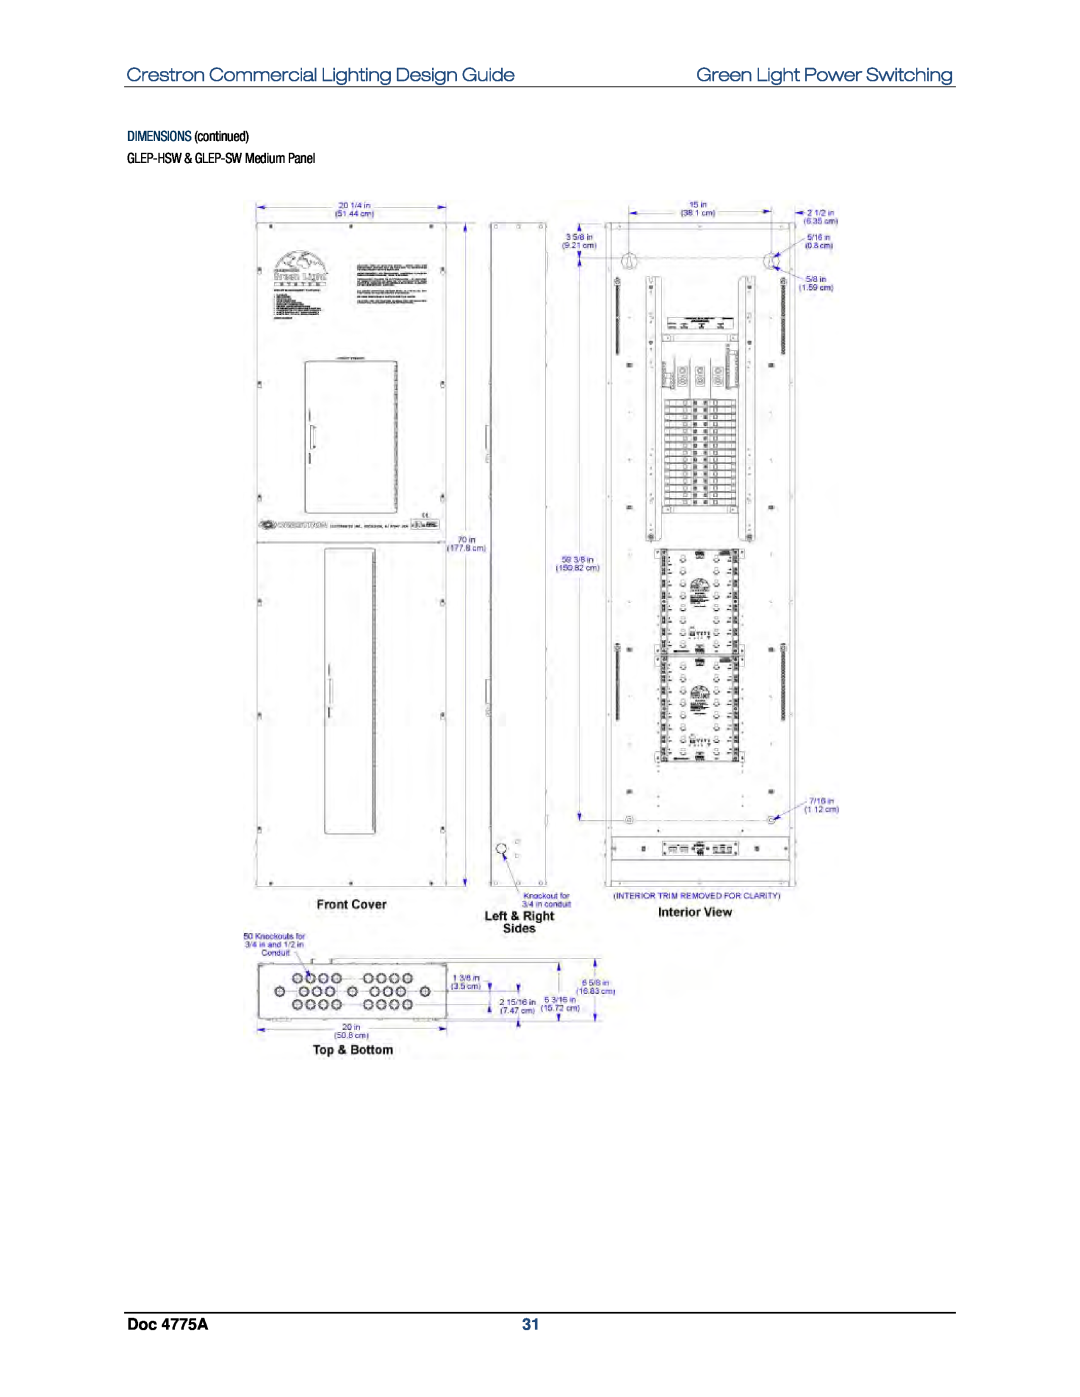 Crestron electronic GLPS-HSW-FT, GLPS-SW Crestron Commercial Lighting Design Guide, Green Light Power Switching, Doc 4775A 